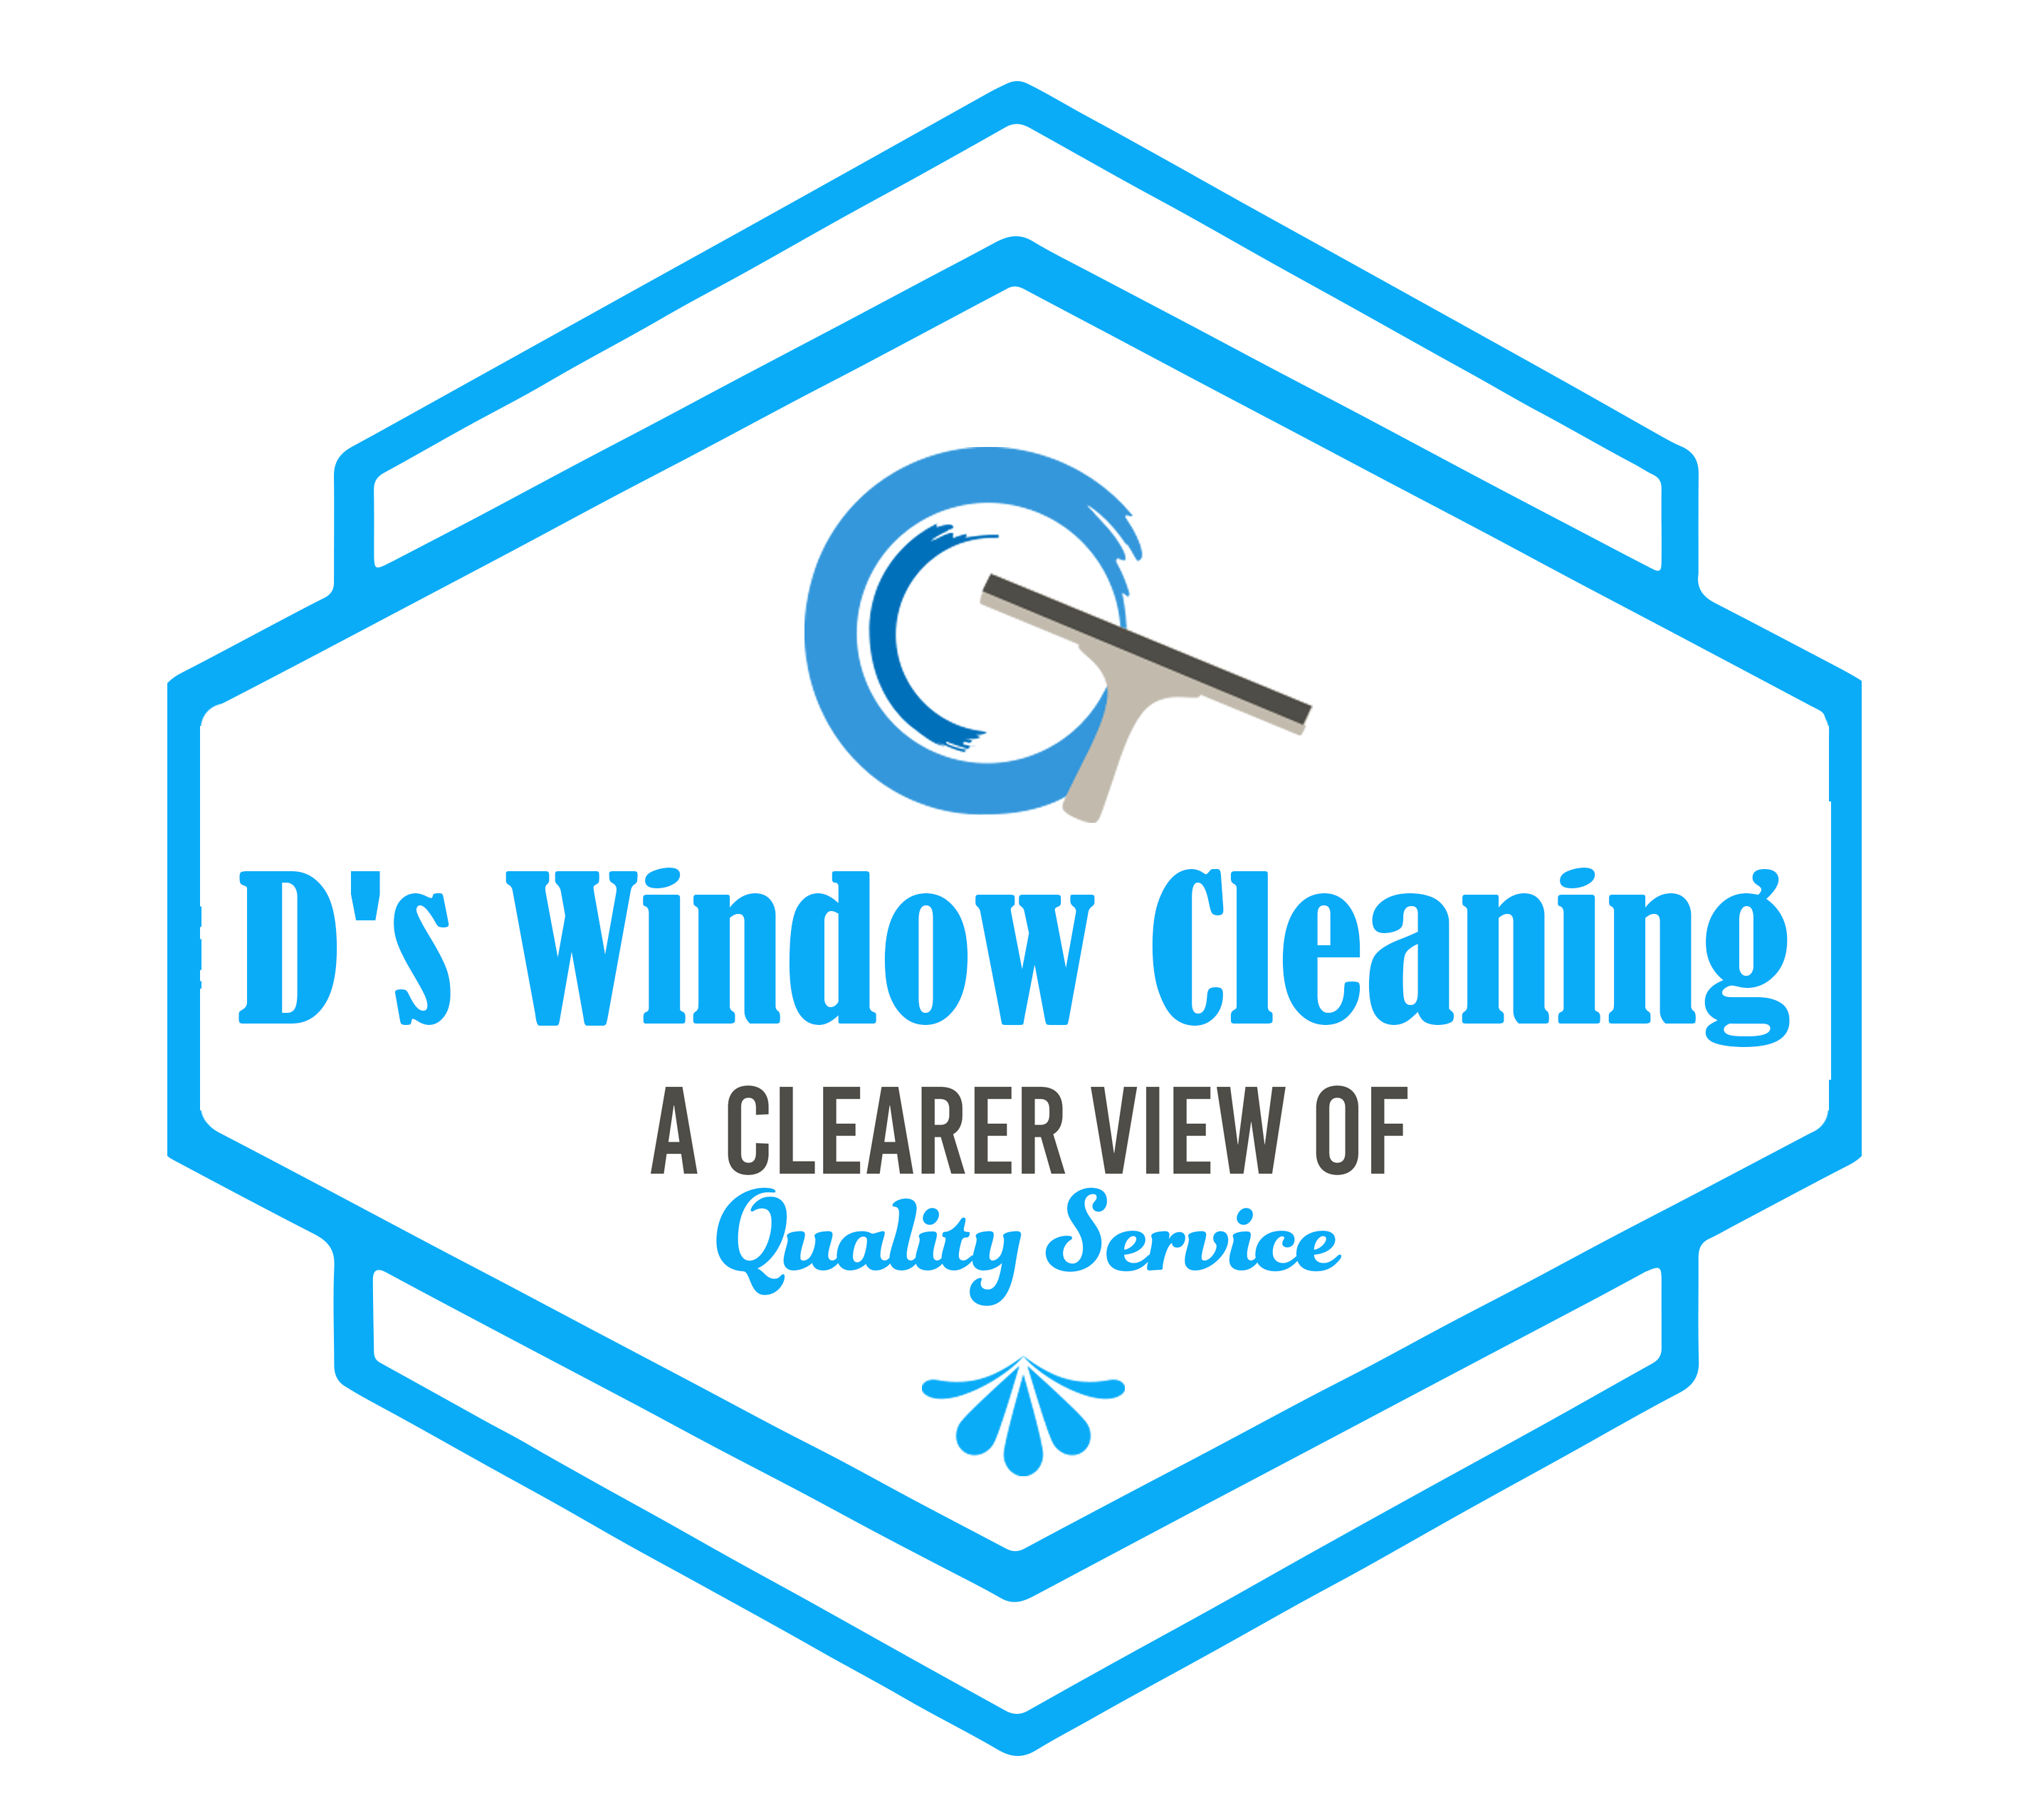 D'S Window Cleaning LLC Window Cleaning Company in Moses lake WA